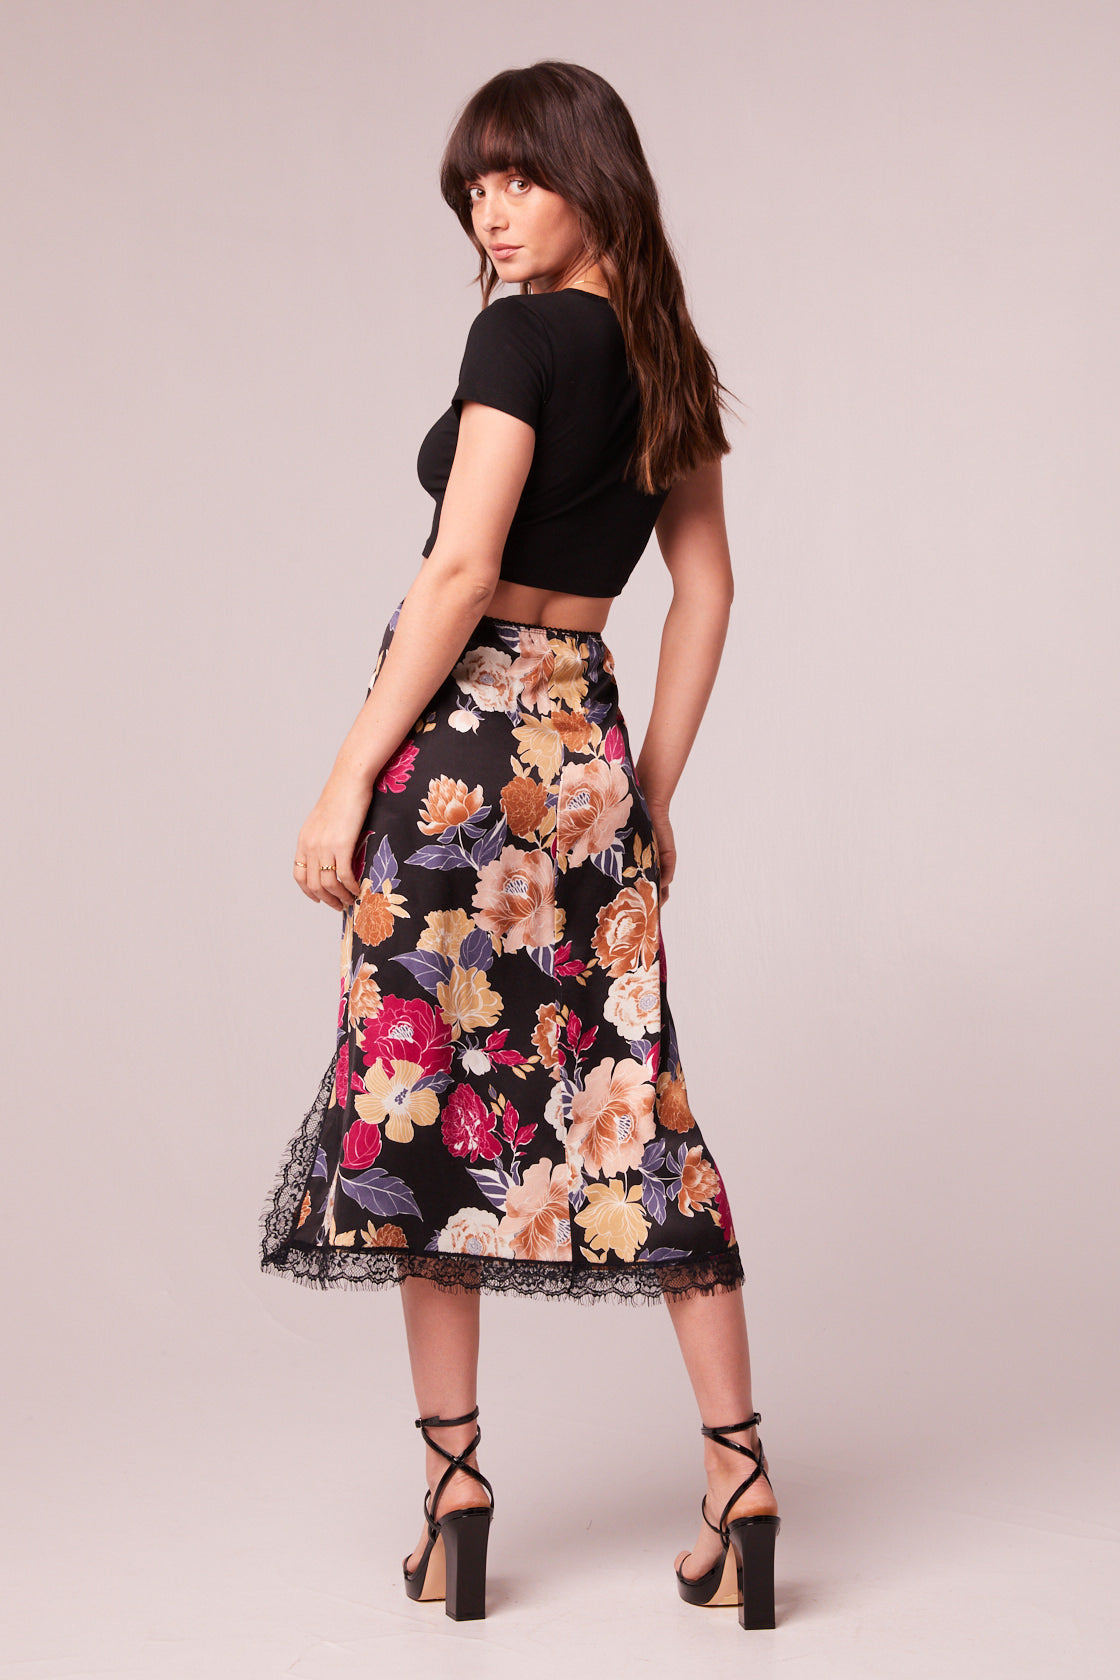 Lilou Black Floral Lace Slip band the of free Midi Skirt 